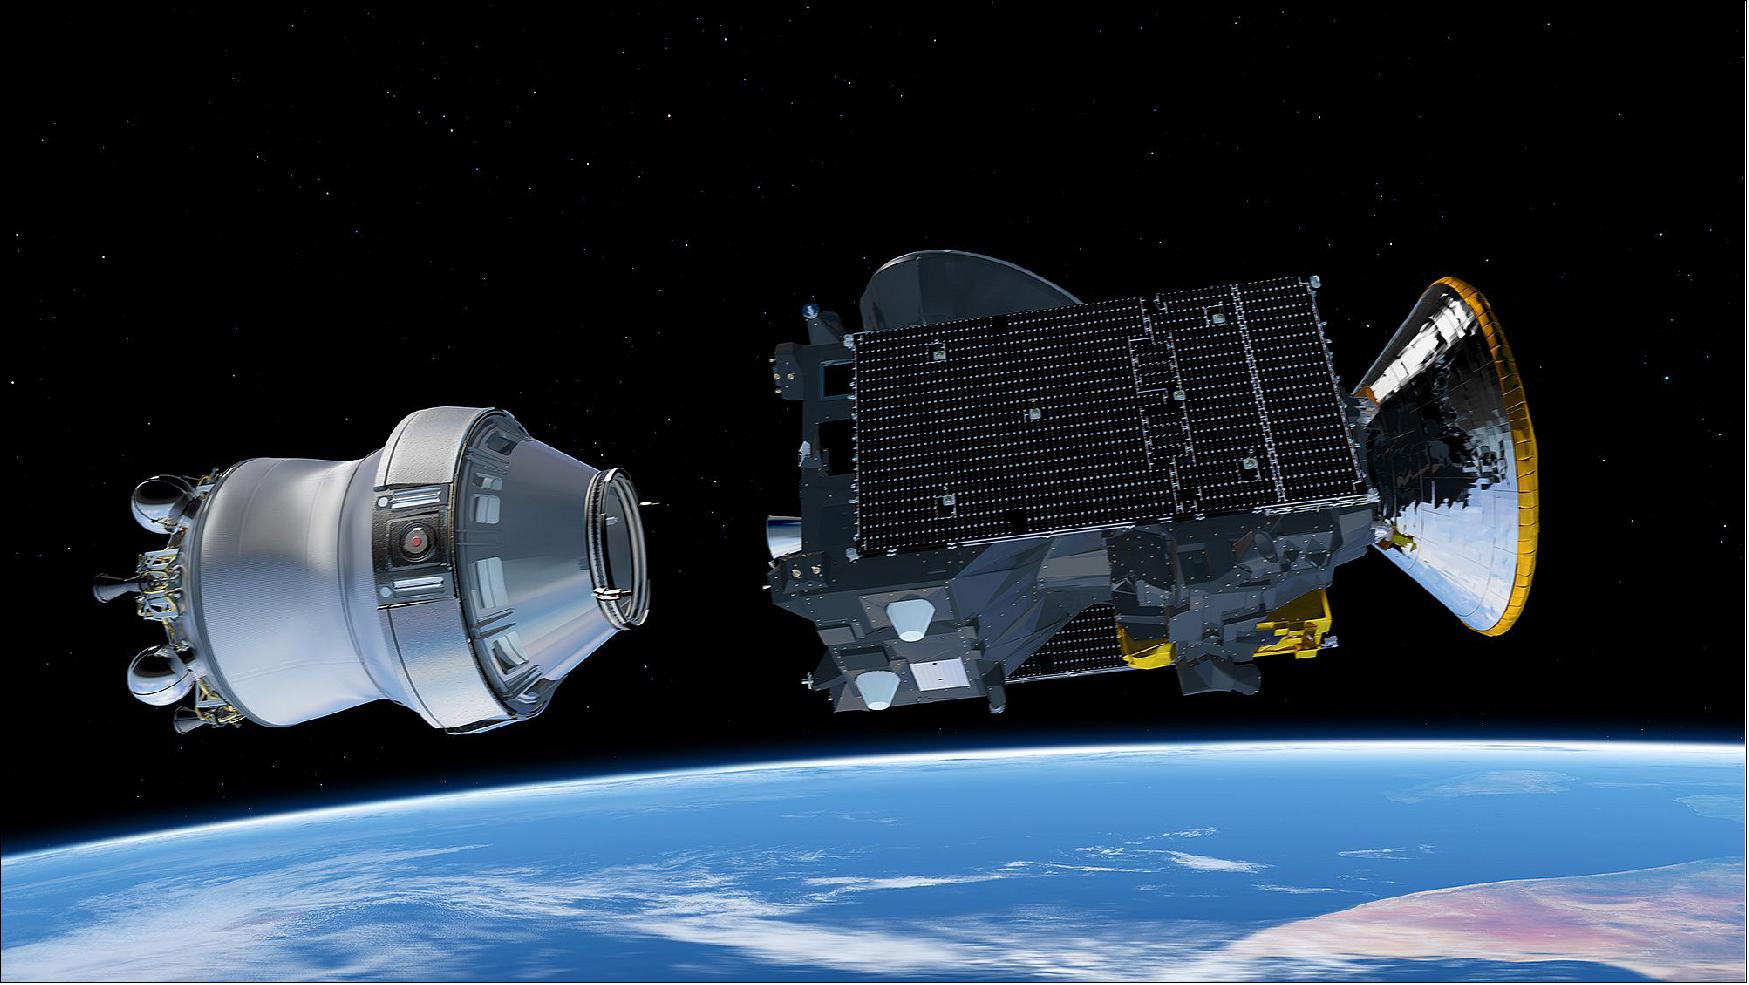 Figure 131: Artists rendition of the ExoMars spacecraft separation from the Briz (Breeze) fourth stage (image credit: ESA)